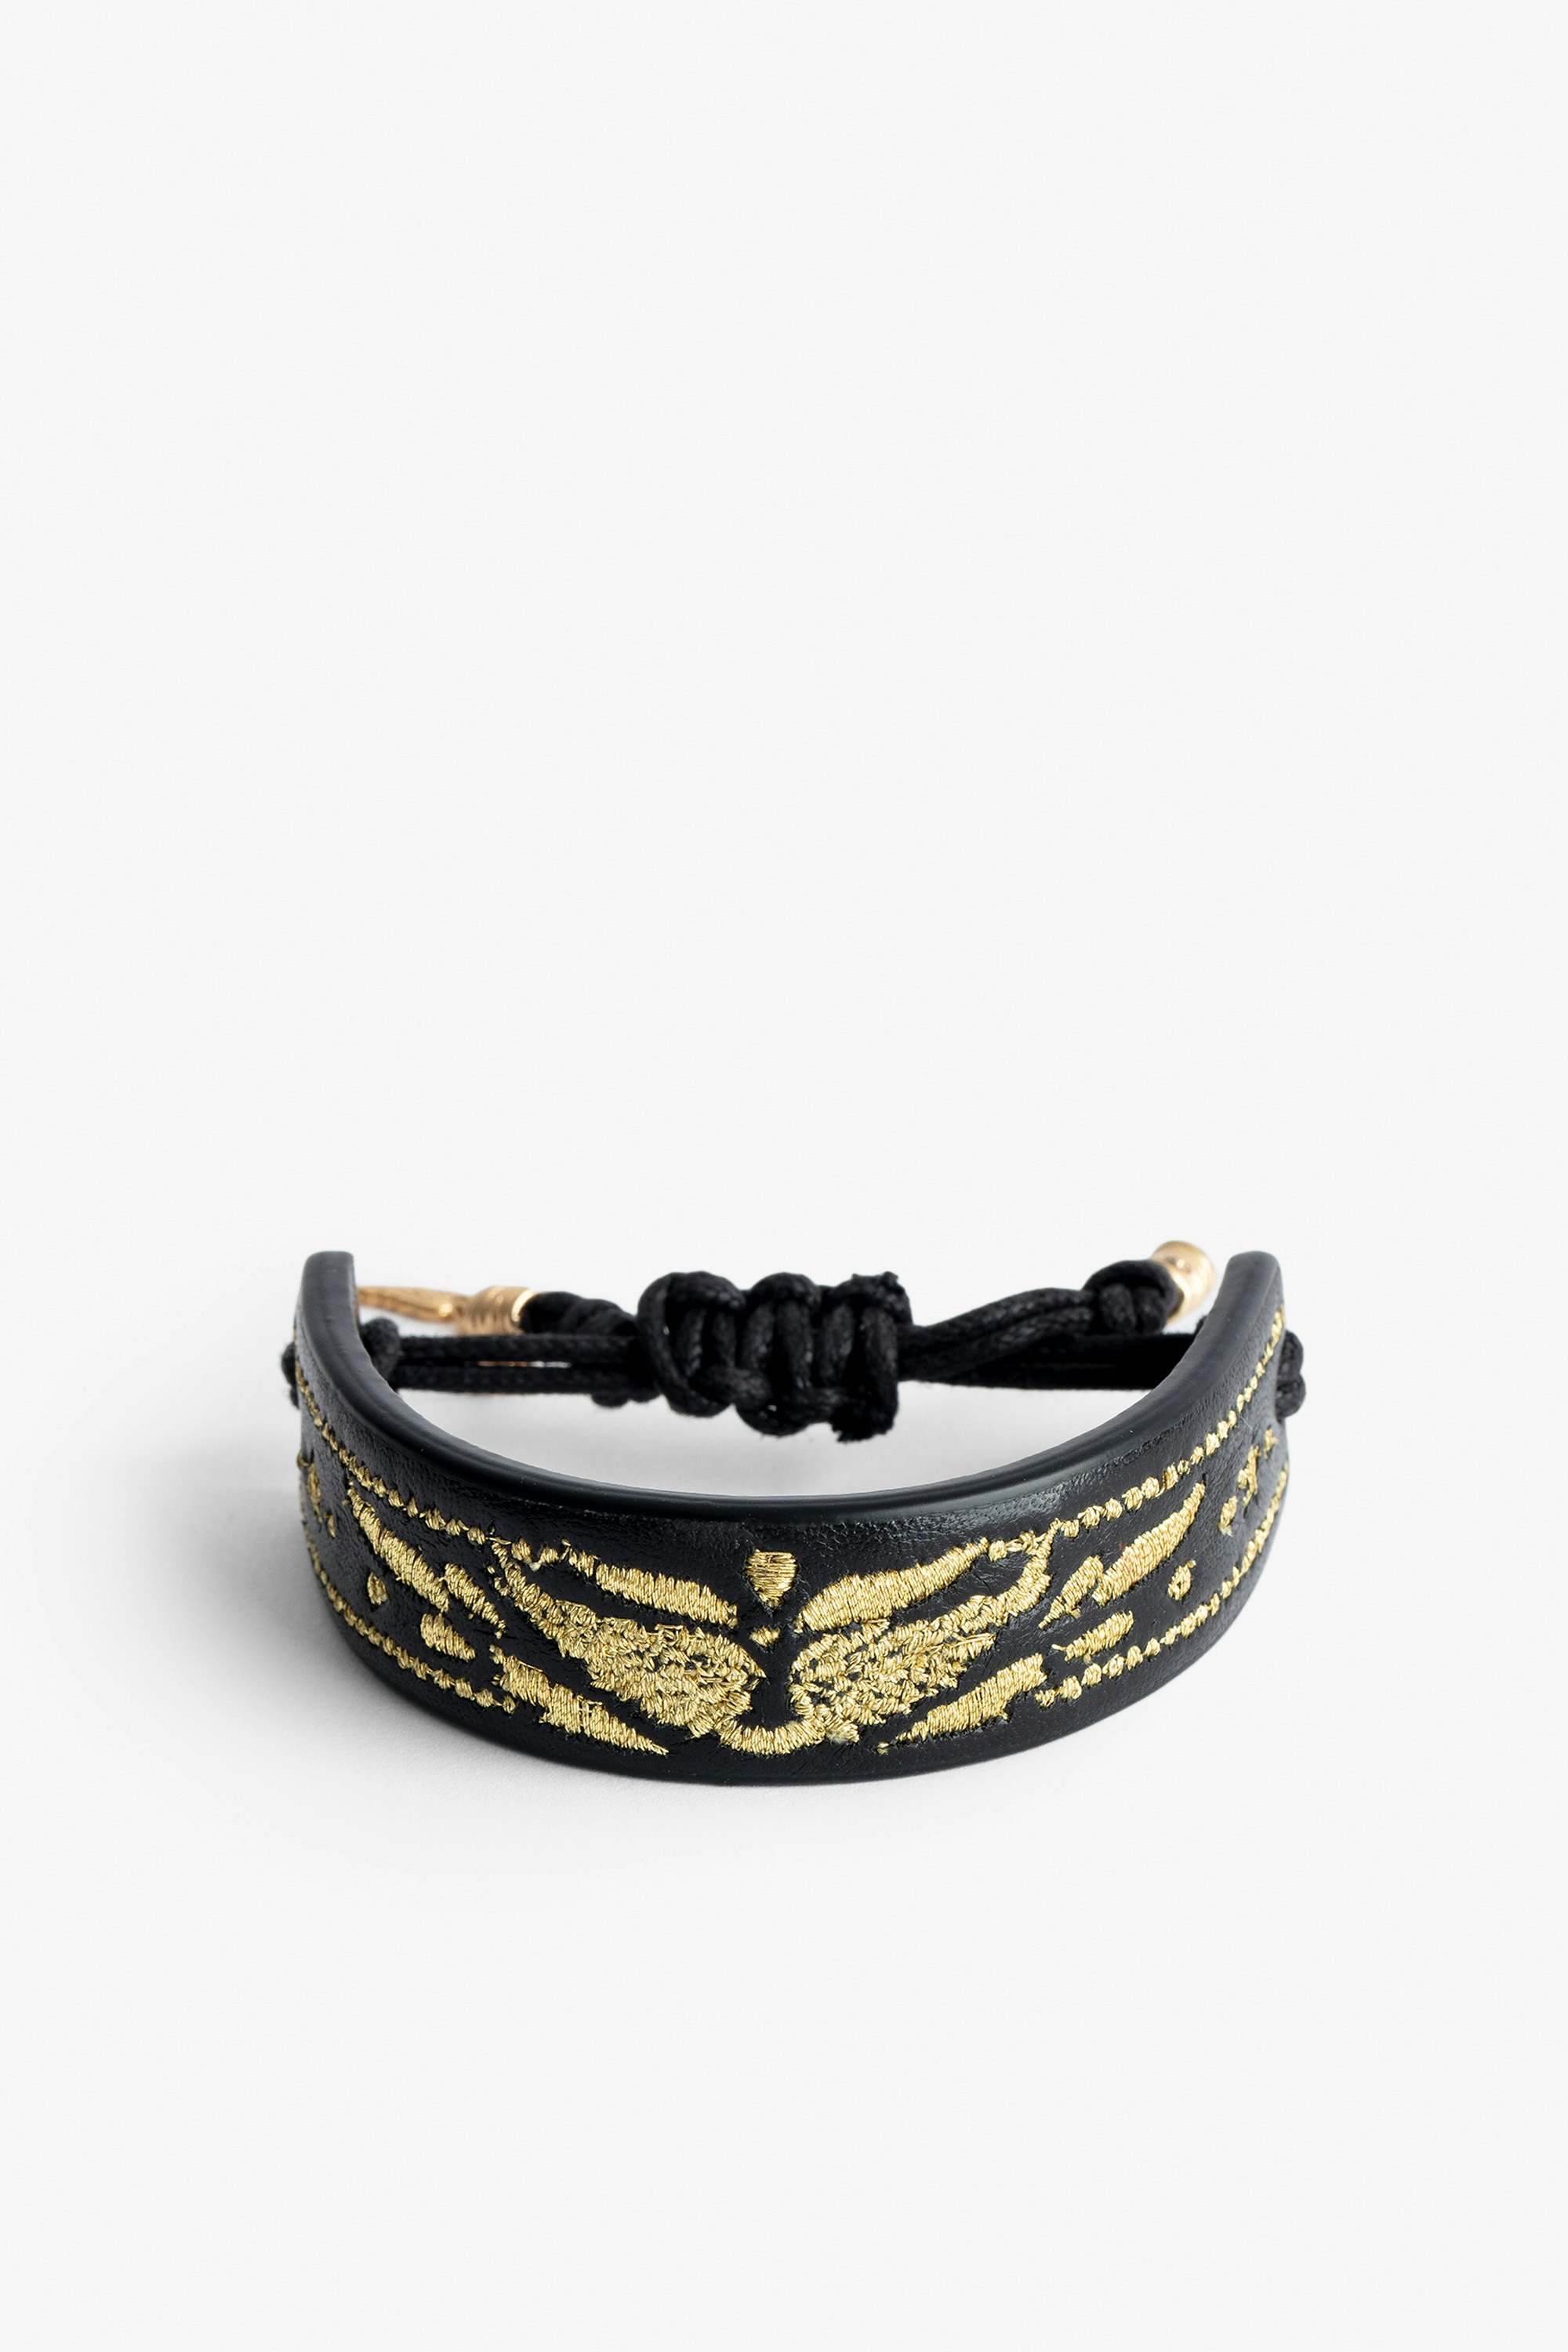 Lenny Bracelet - Voltaire Vice black leather cuff bracelet with gold-tone wings.